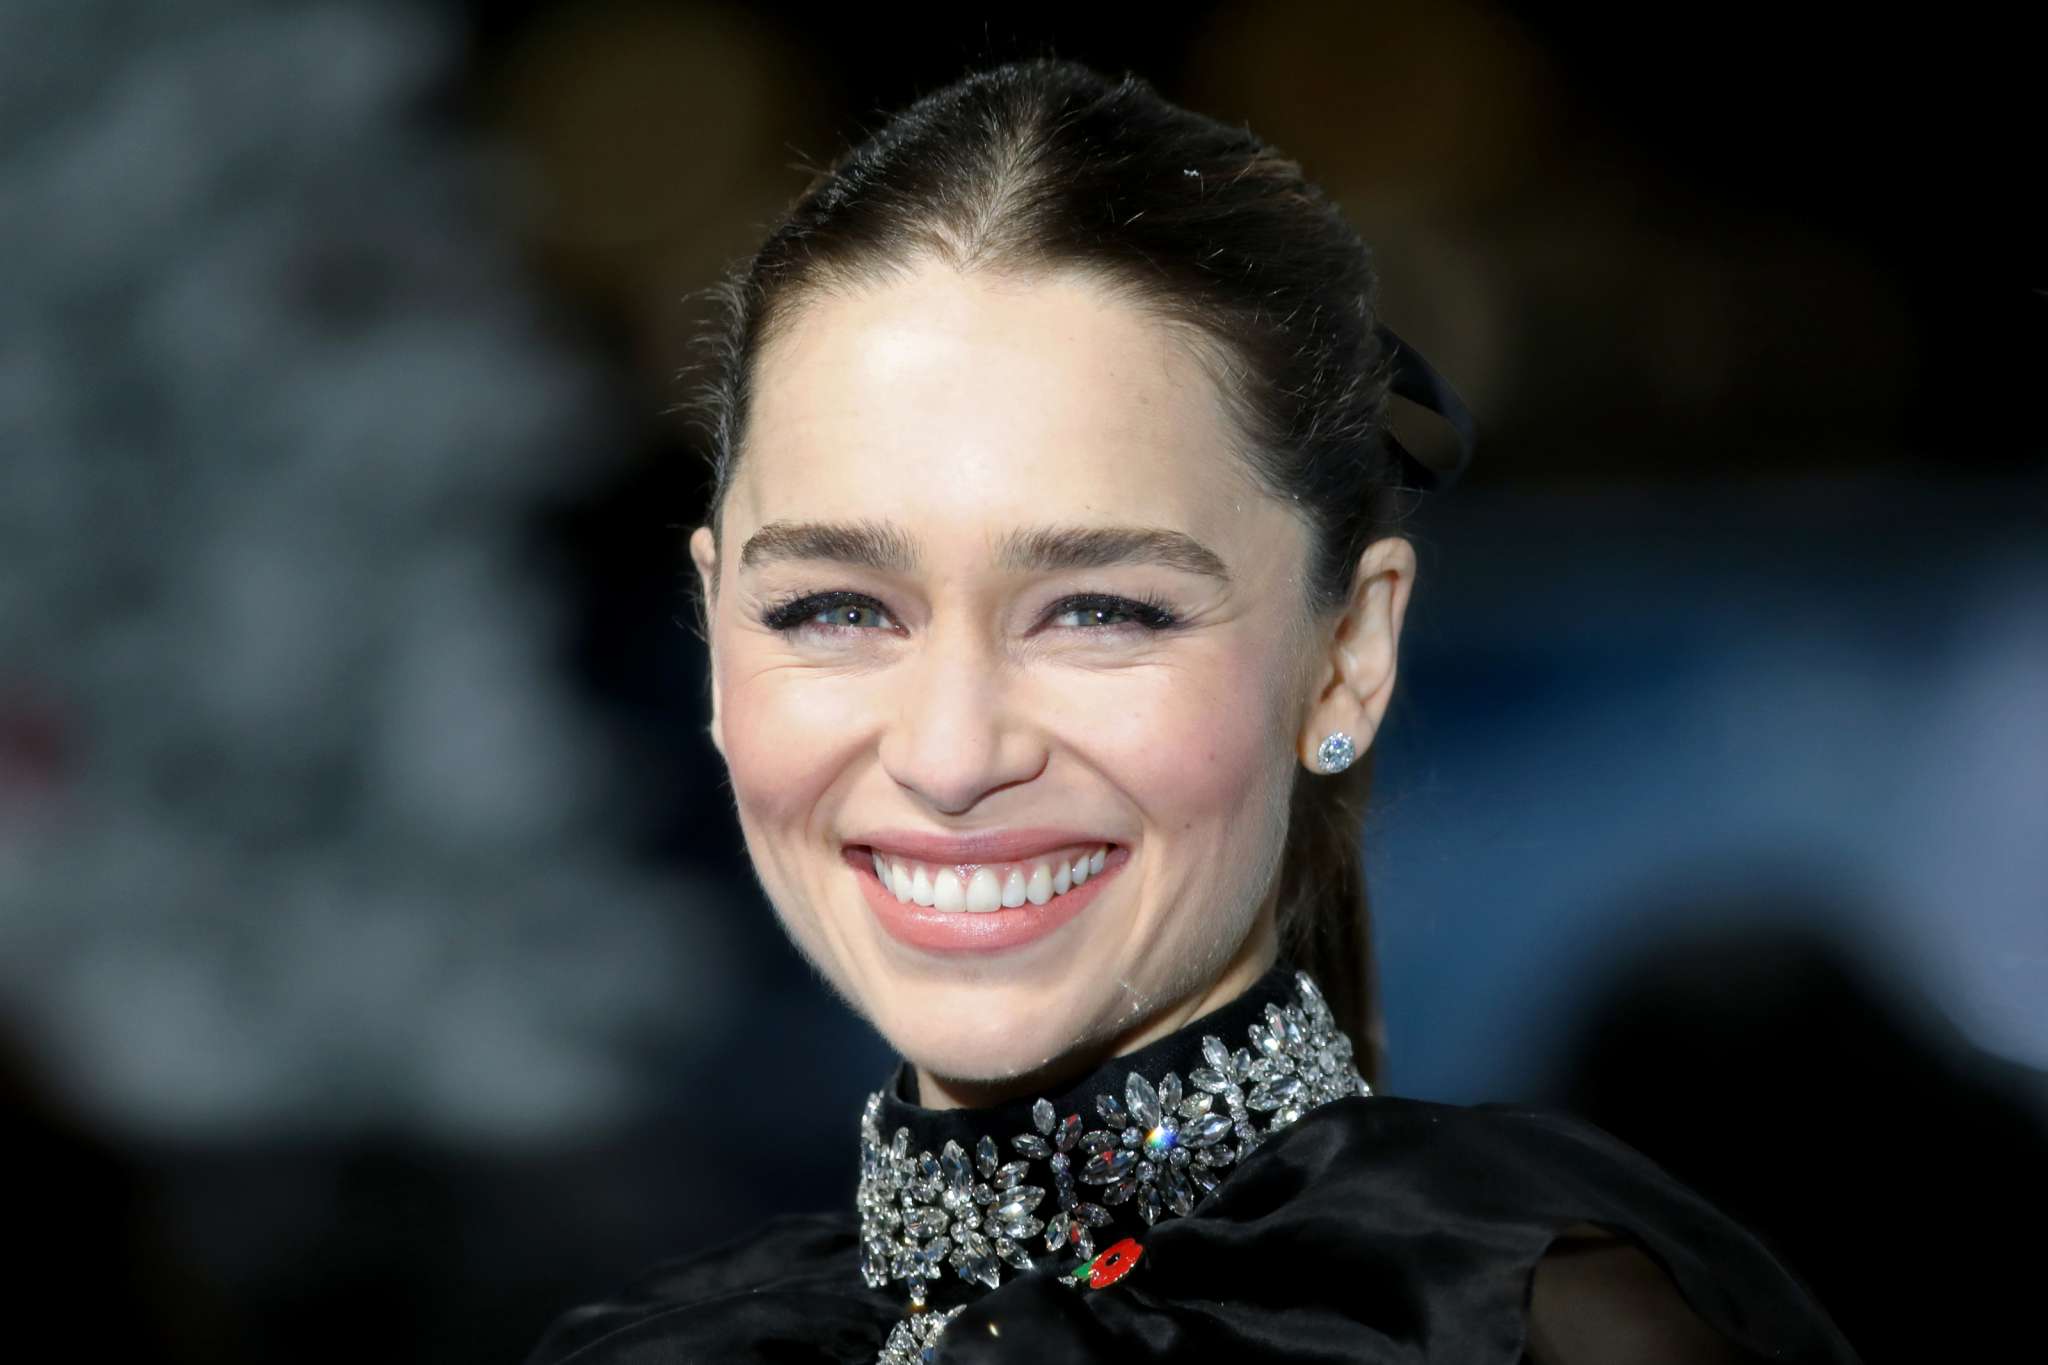 Emilia Clarke, Star of Game Of Thrones, Suffered Two Aneurysm; Feels Like She's Missing Parts Of Her Brain